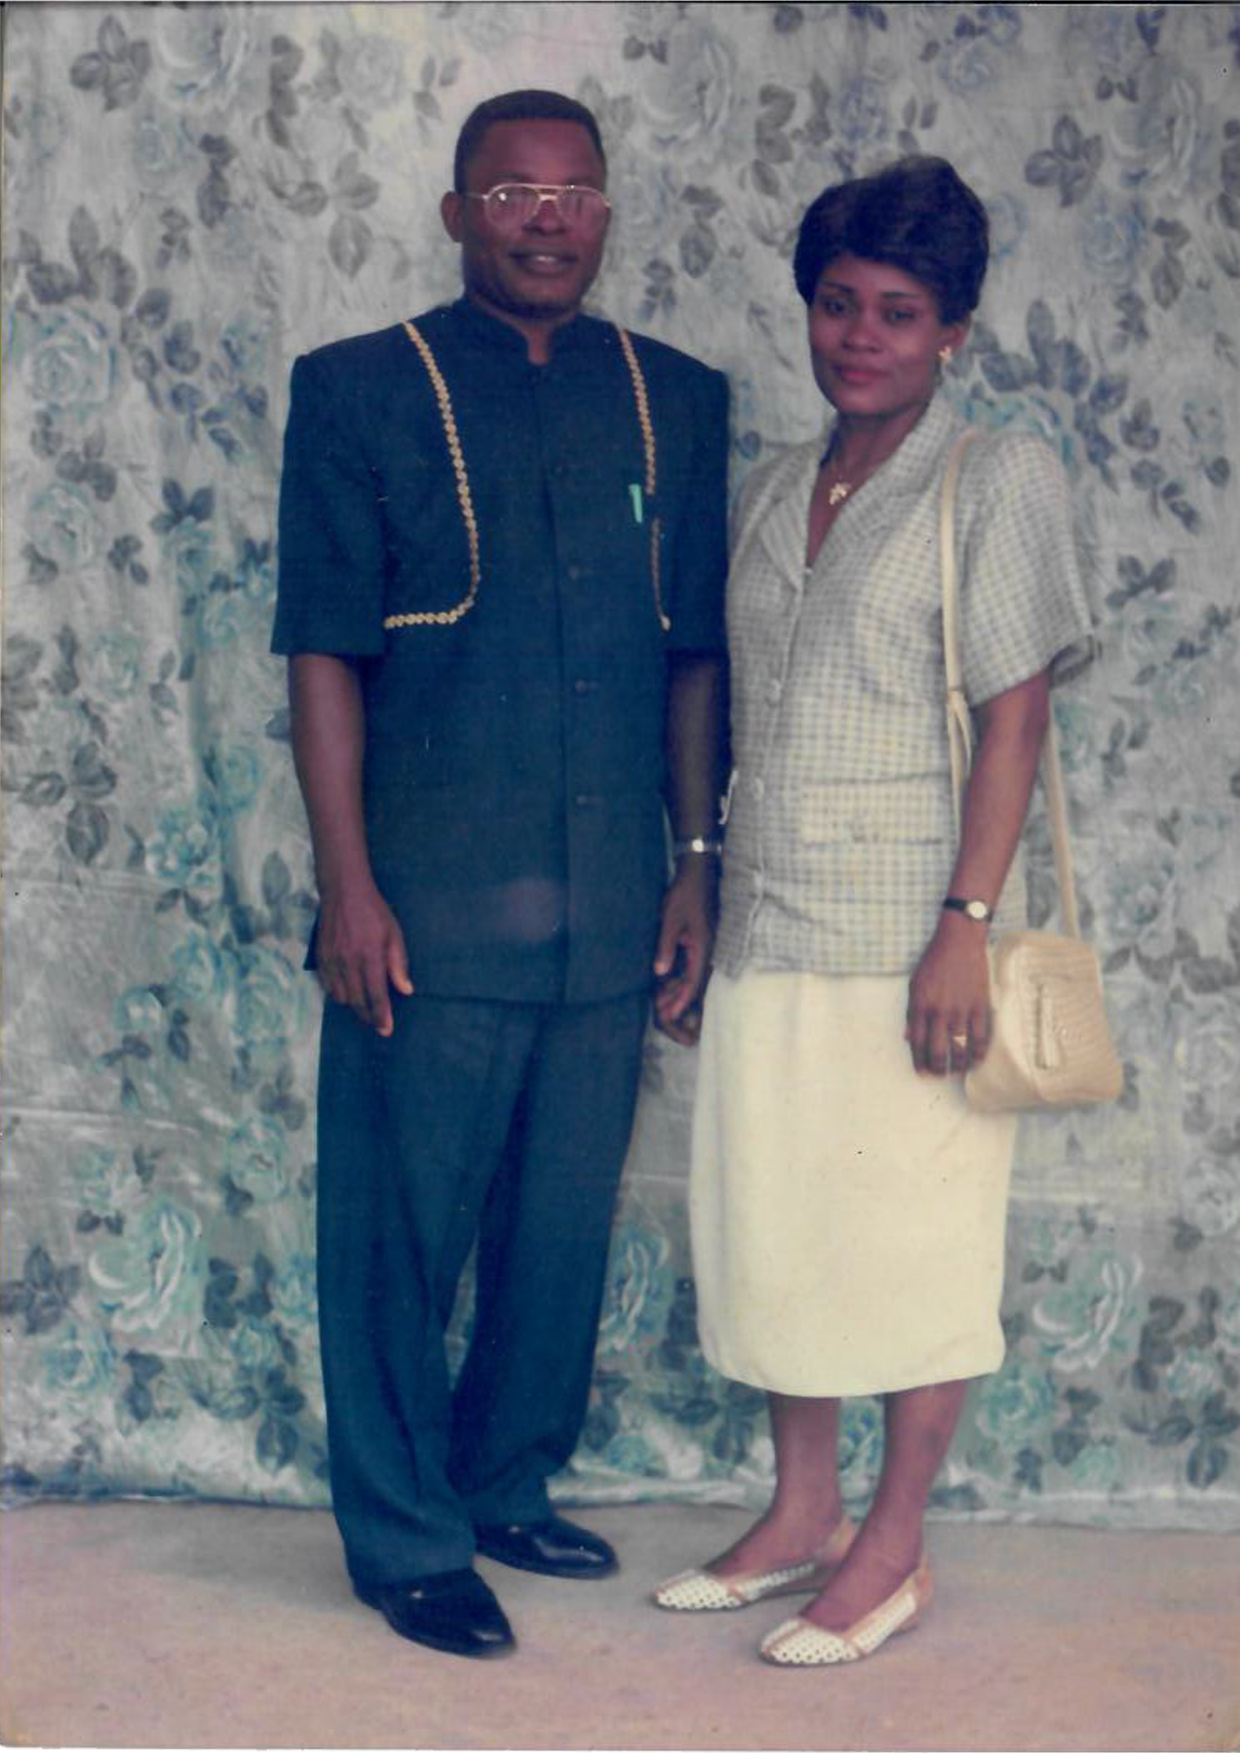 Mum and Dad after church service